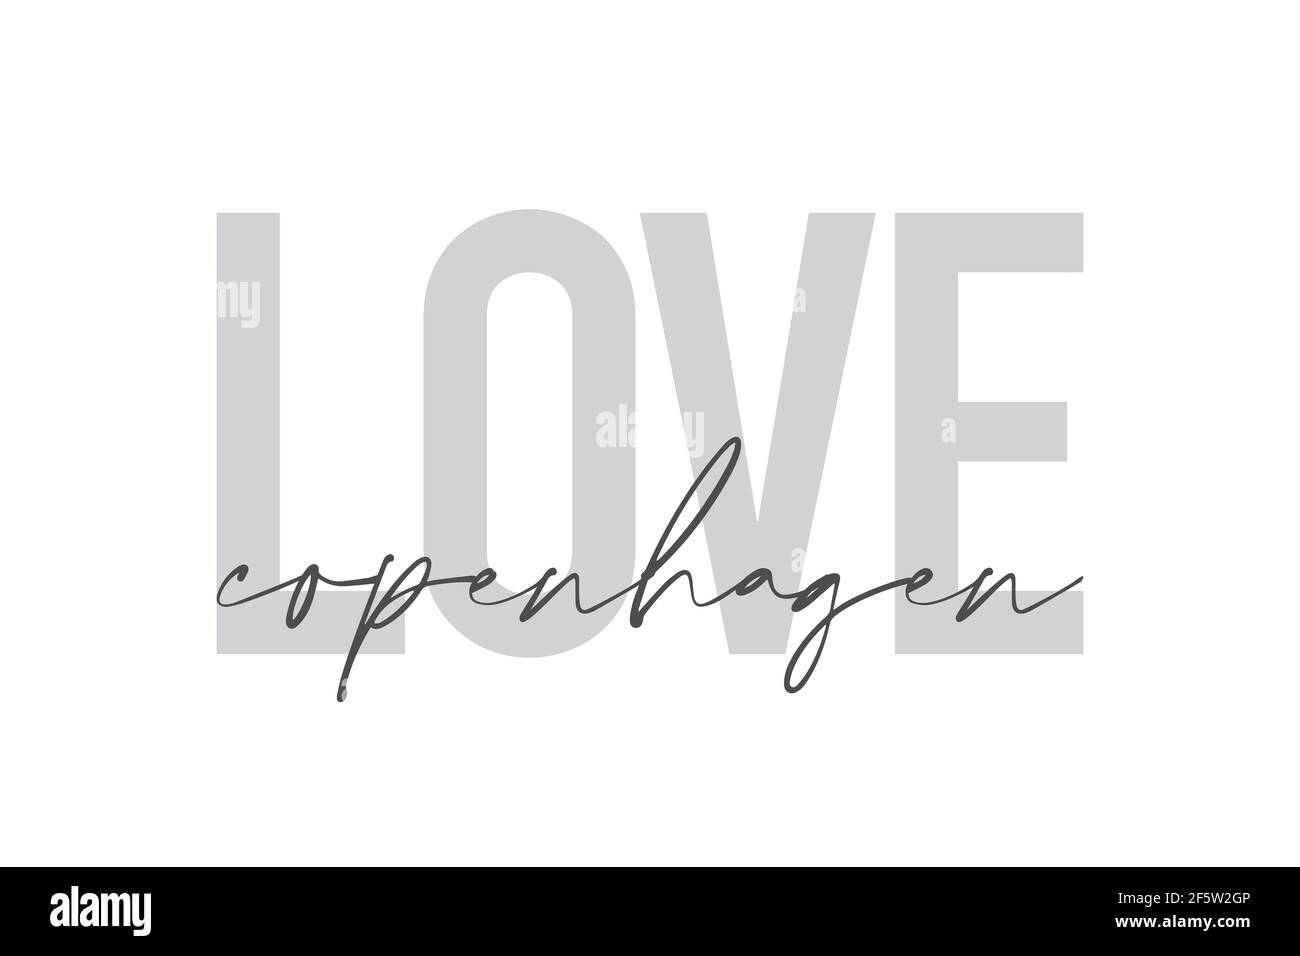 Modern, urban, simple graphic design of a saying 'Love Copenhagen' in grey colors. Trendy, cool, handwritten typography Stock Photo